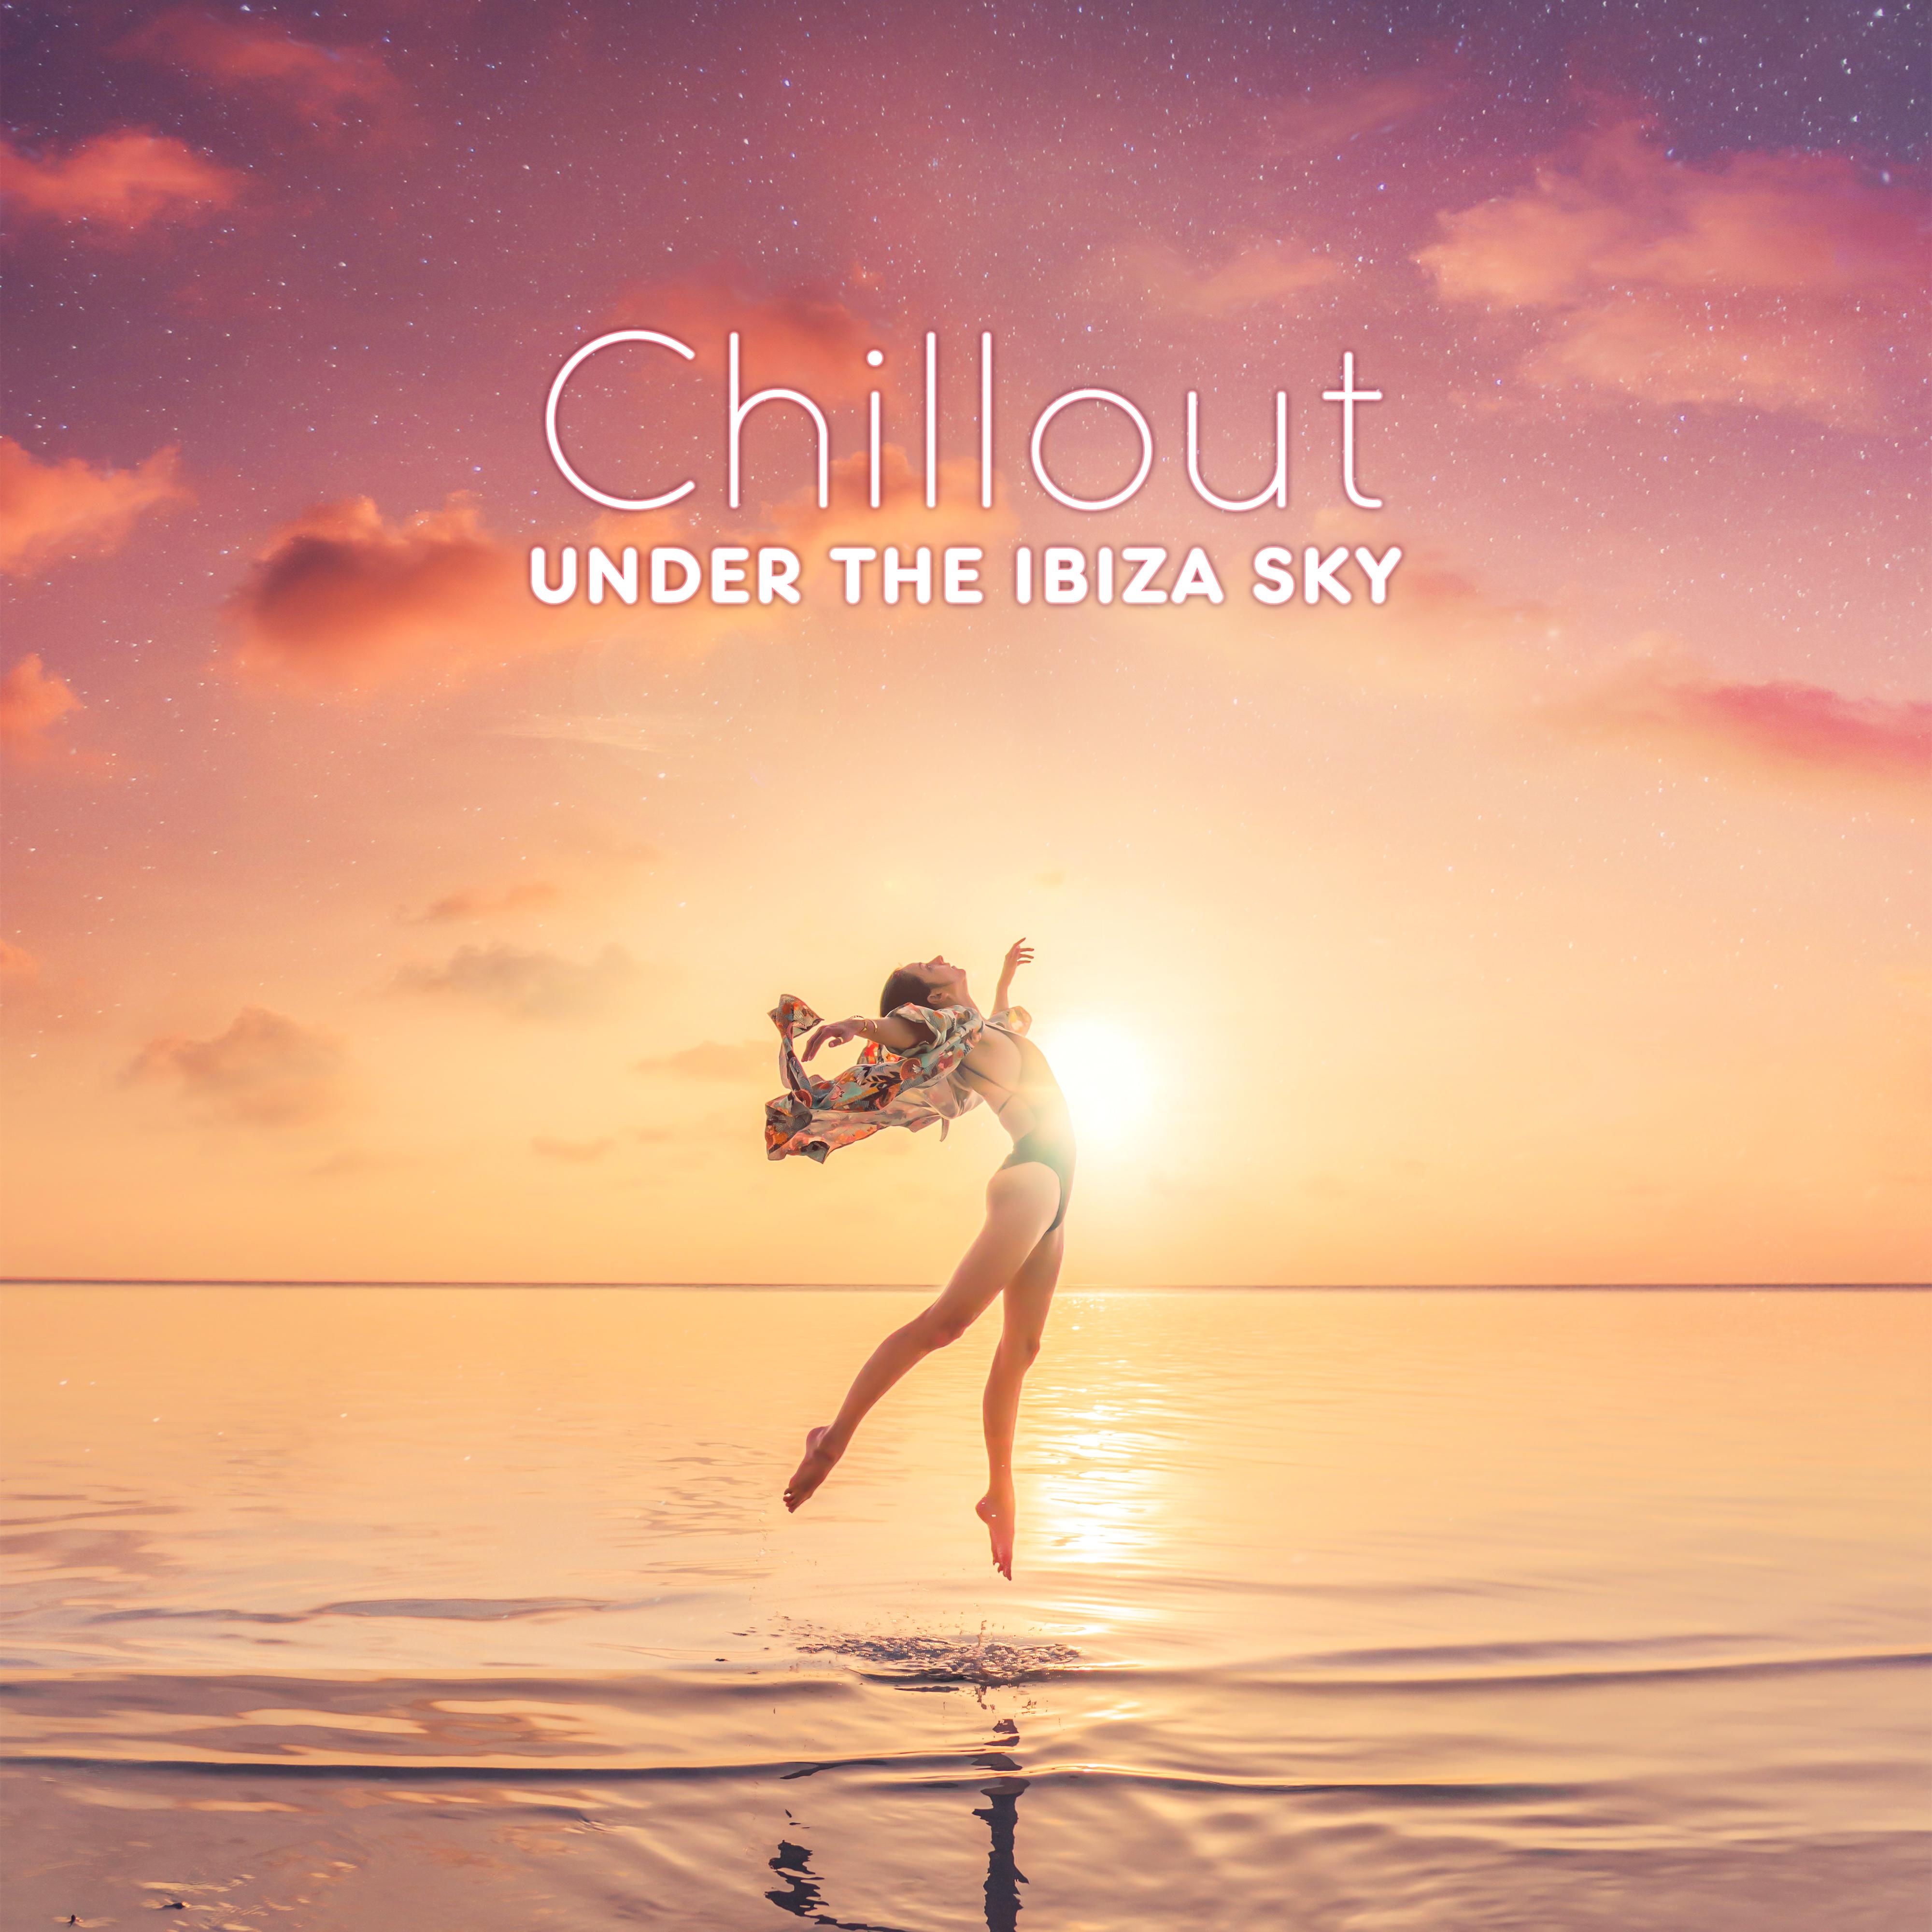 Chillout Under the Ibiza Sky: 2019 Chill Out Music Compilation for Best Tropical Vacation Experience, Summertime Relax on the Beach